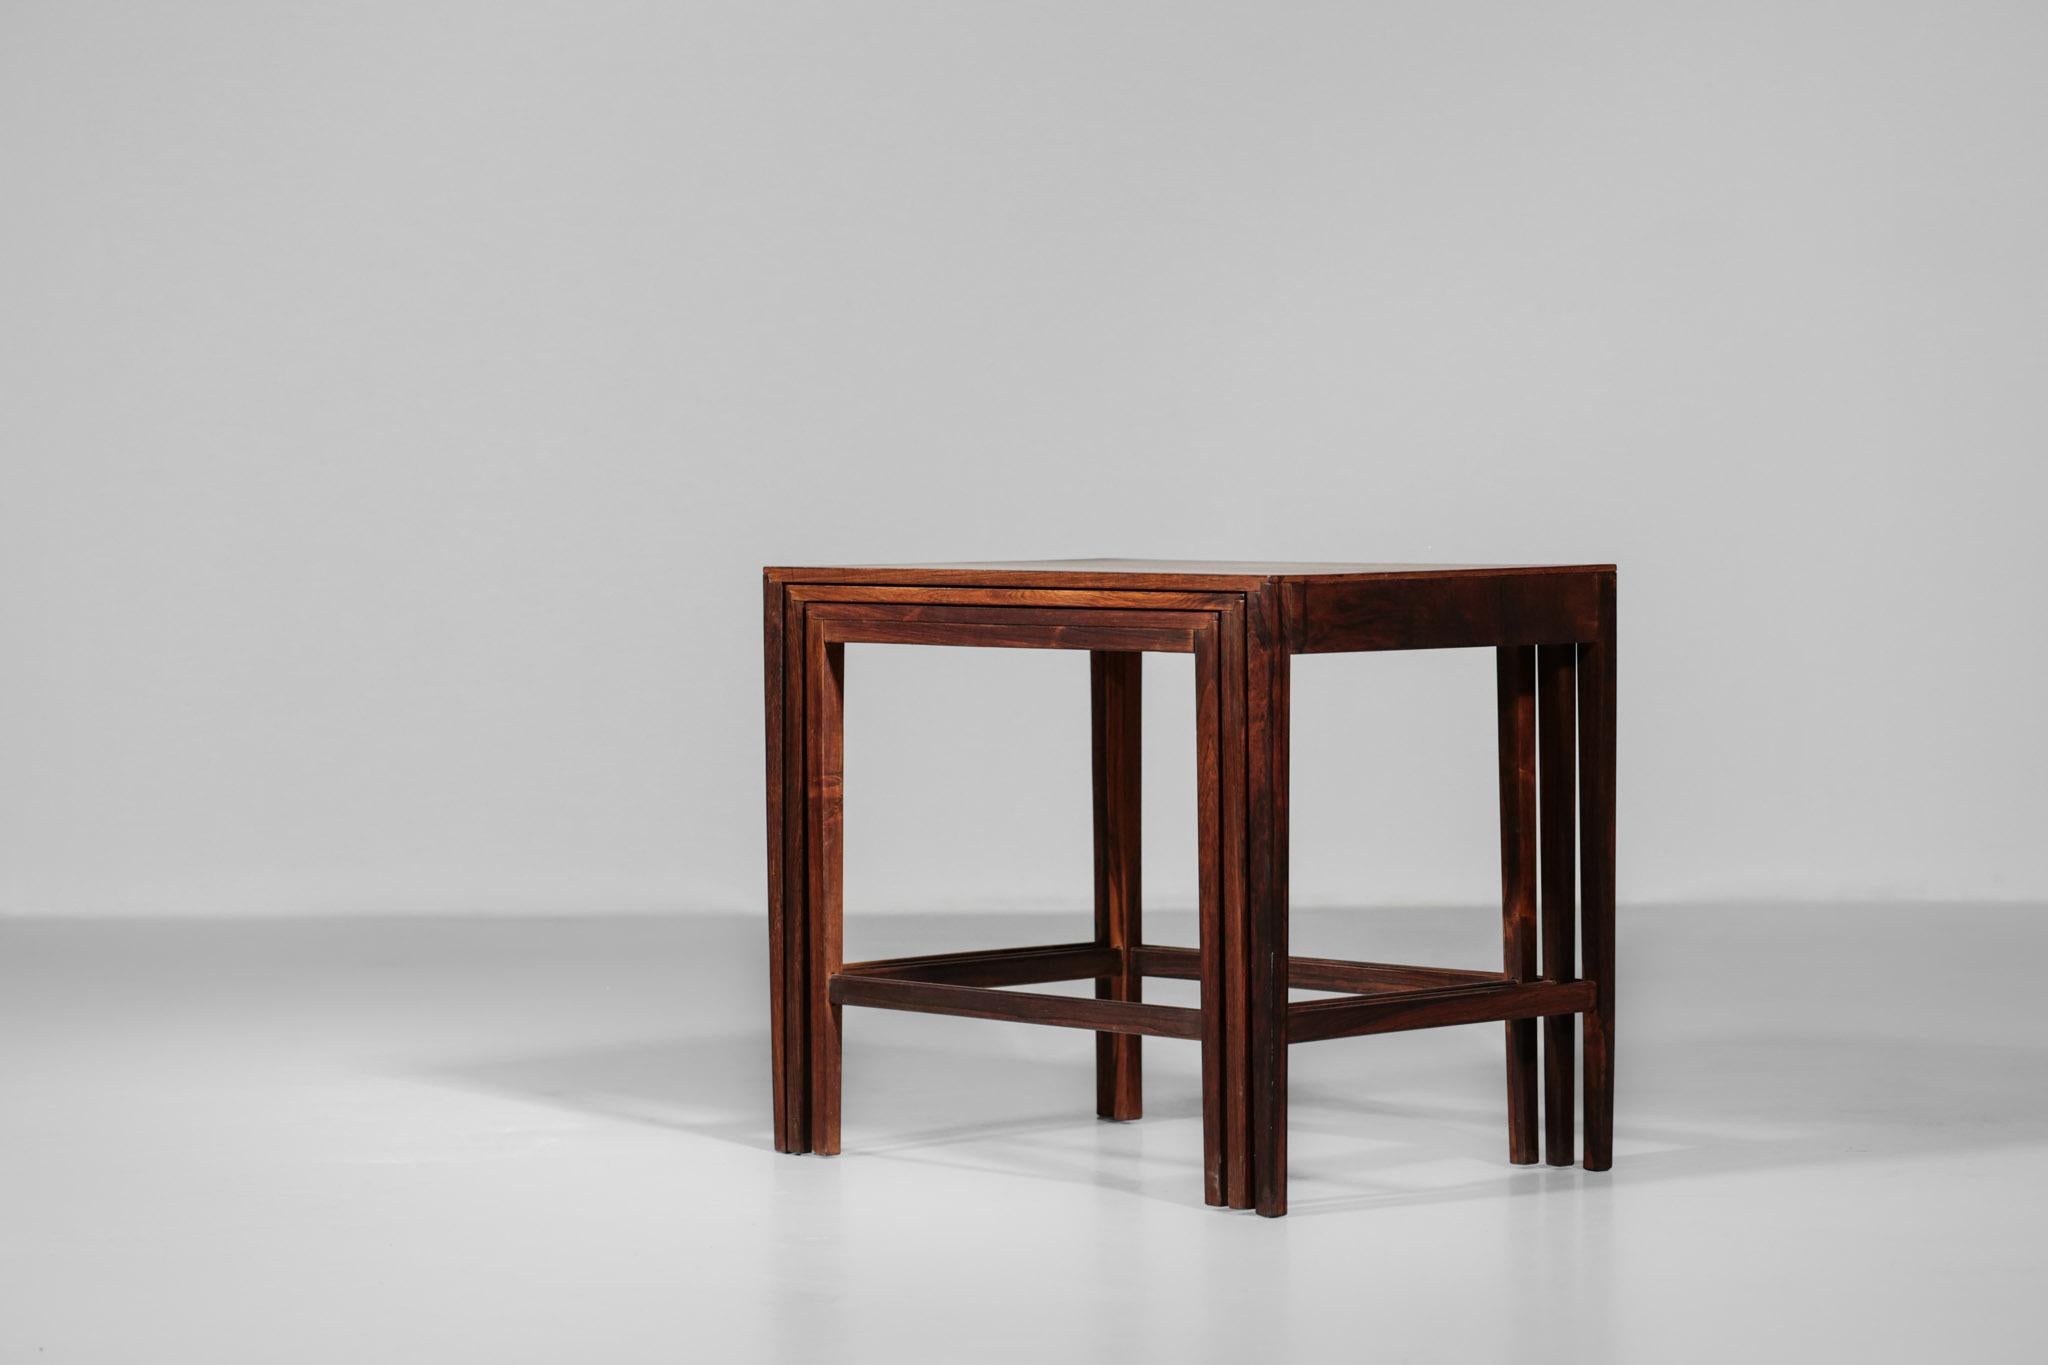 Mid-20th Century Scandinavian Nesting Tables in Rosewood 1960s Danish For Sale